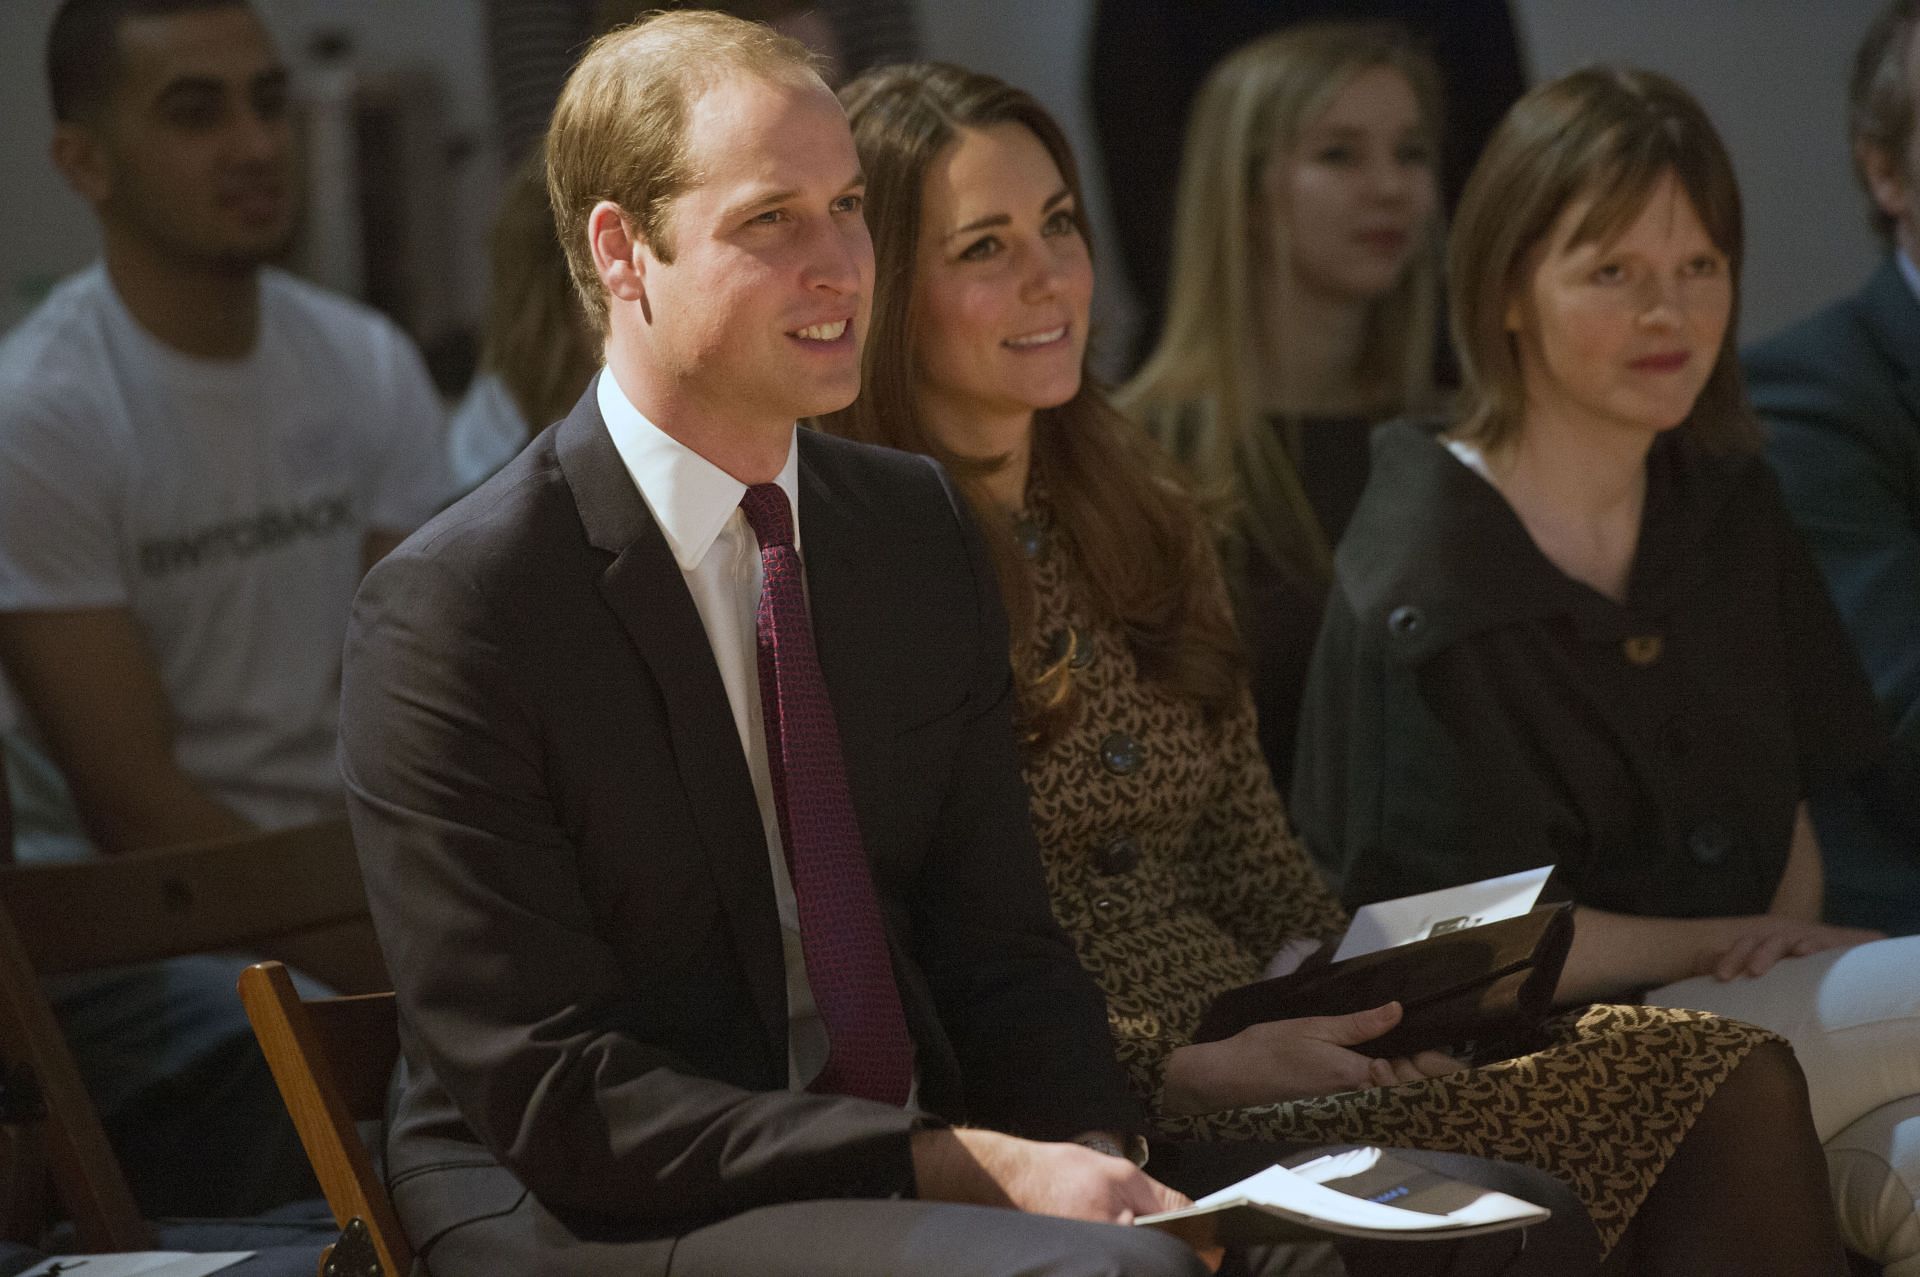 The Duke And Duchess Of Cambridge Attend Only Connect Projects in 2013 (Image via Getty)